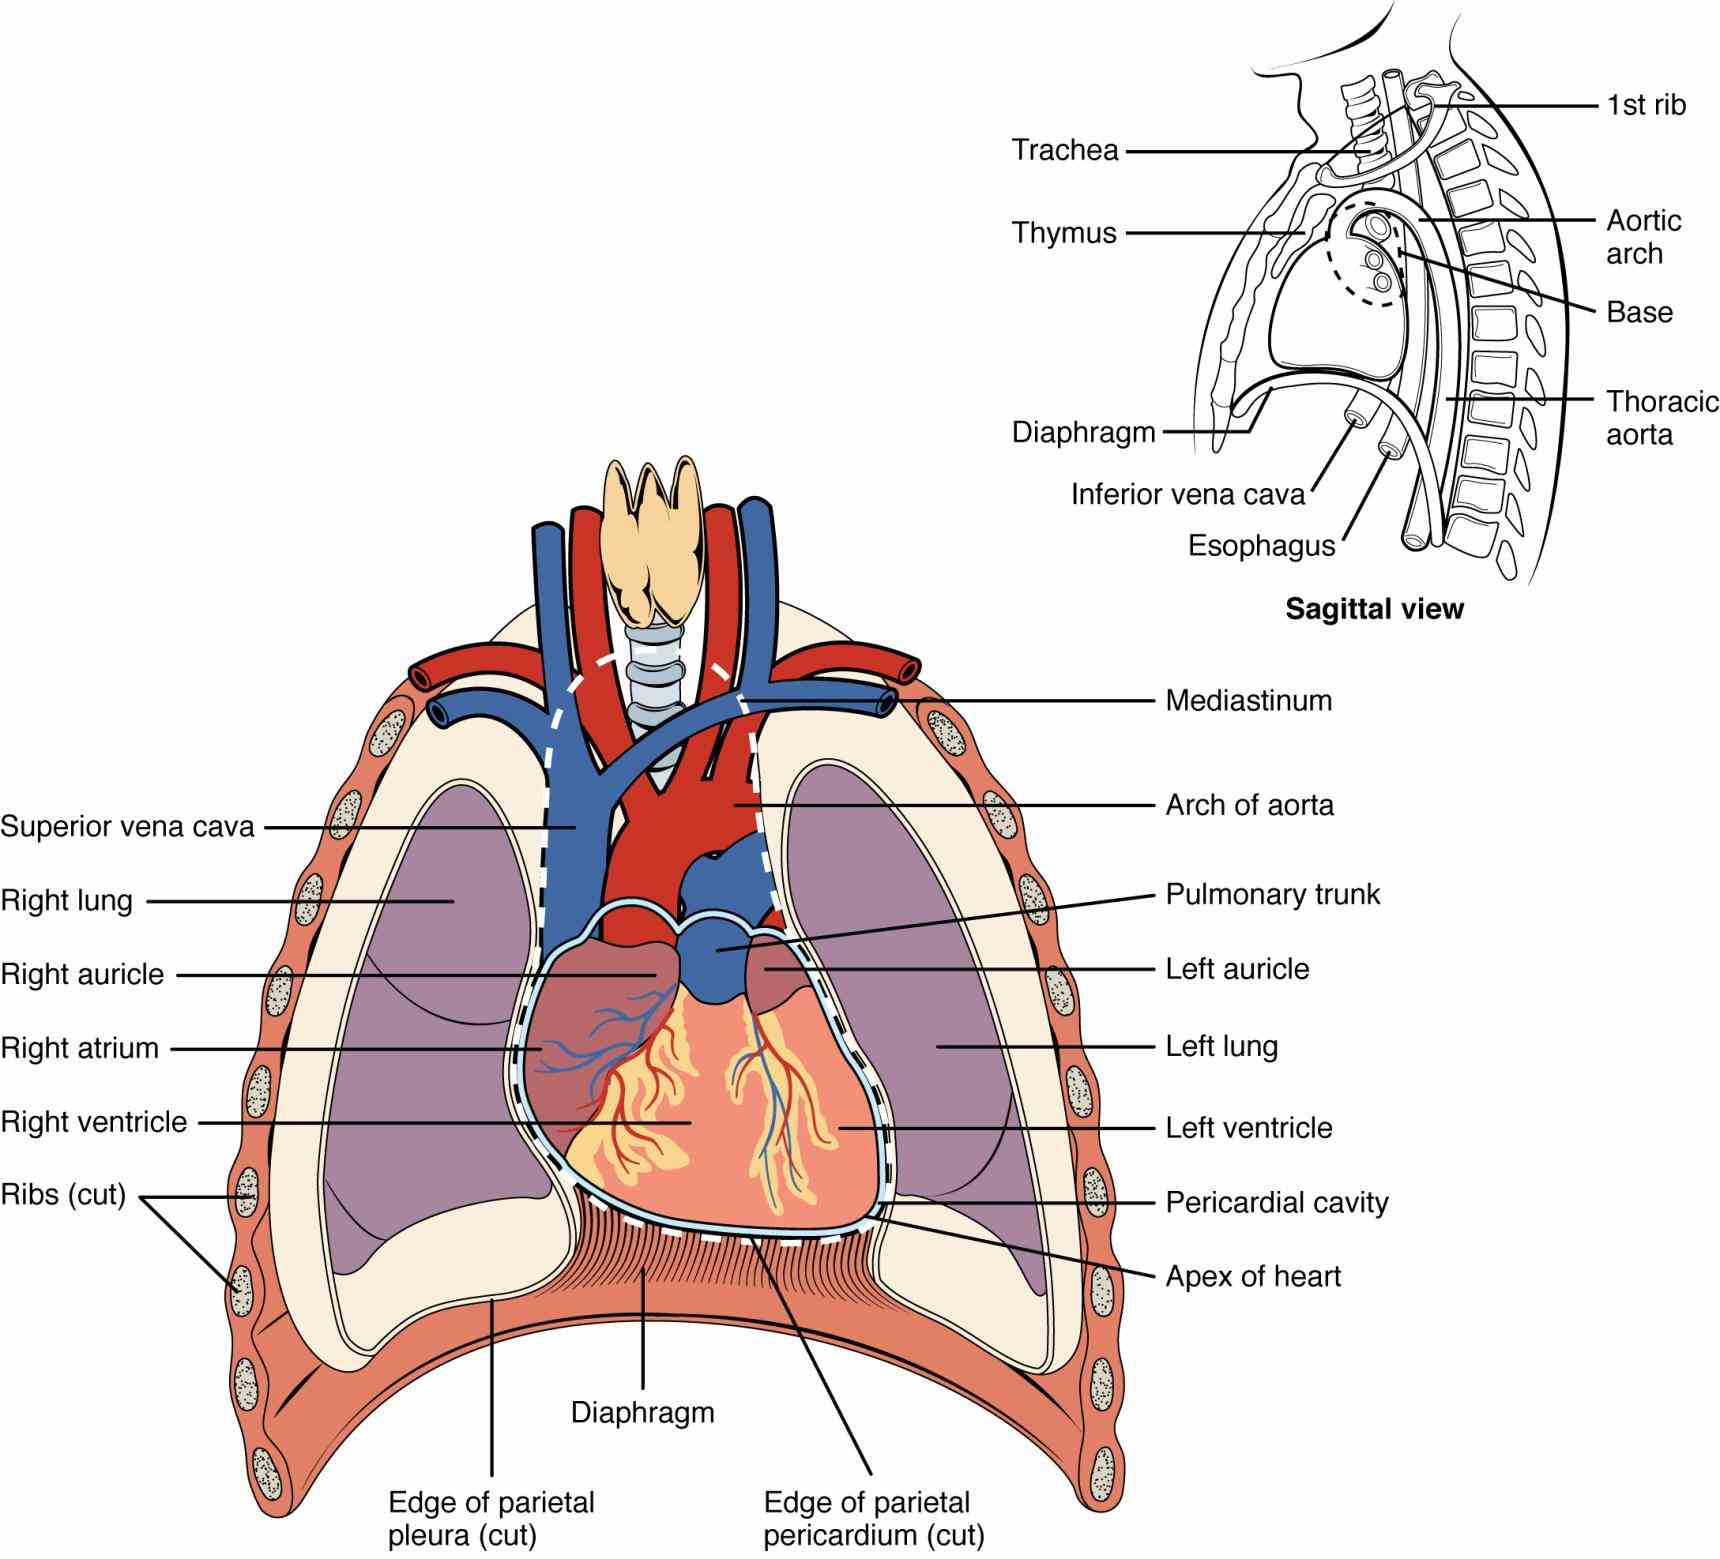 cells t true Double Layered Membrane On The Outside Of The Heart or false the double layered membrane that